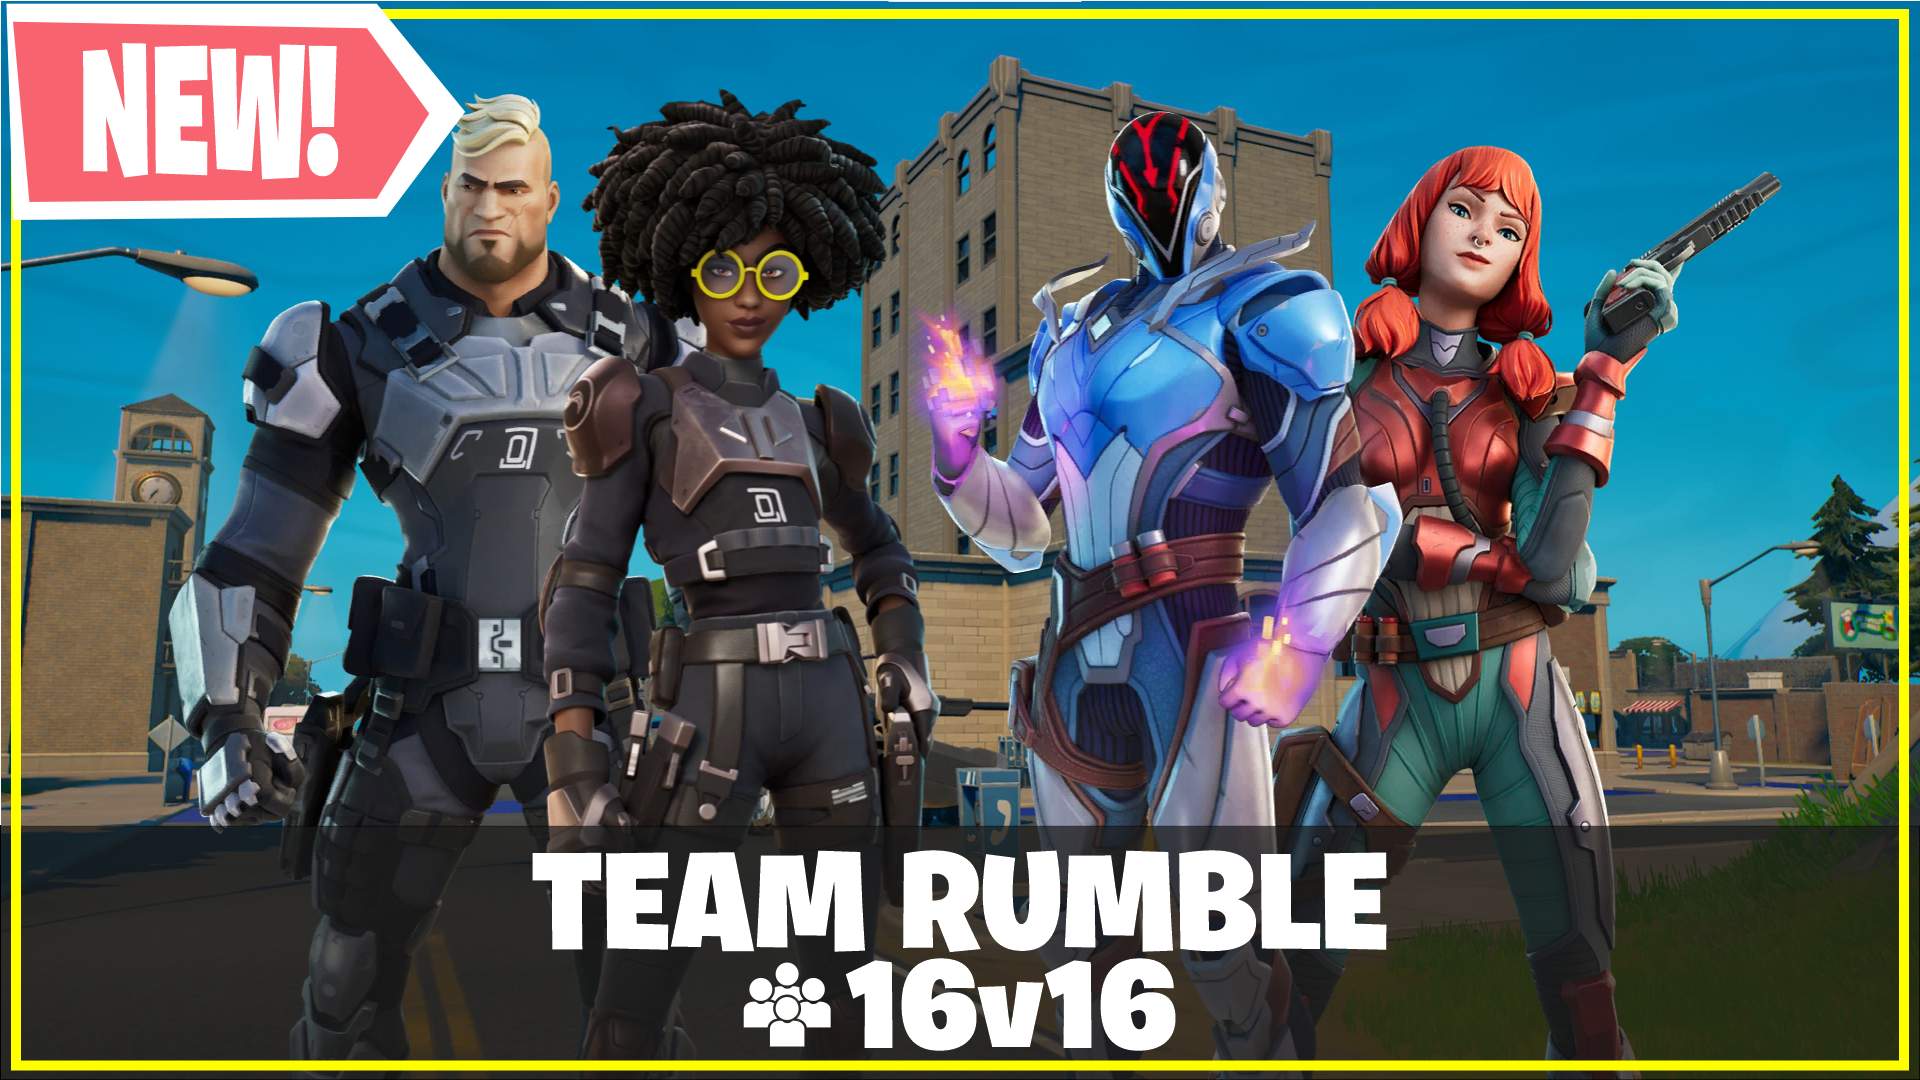 TEAM RUMBLE - TILTED TOWERS